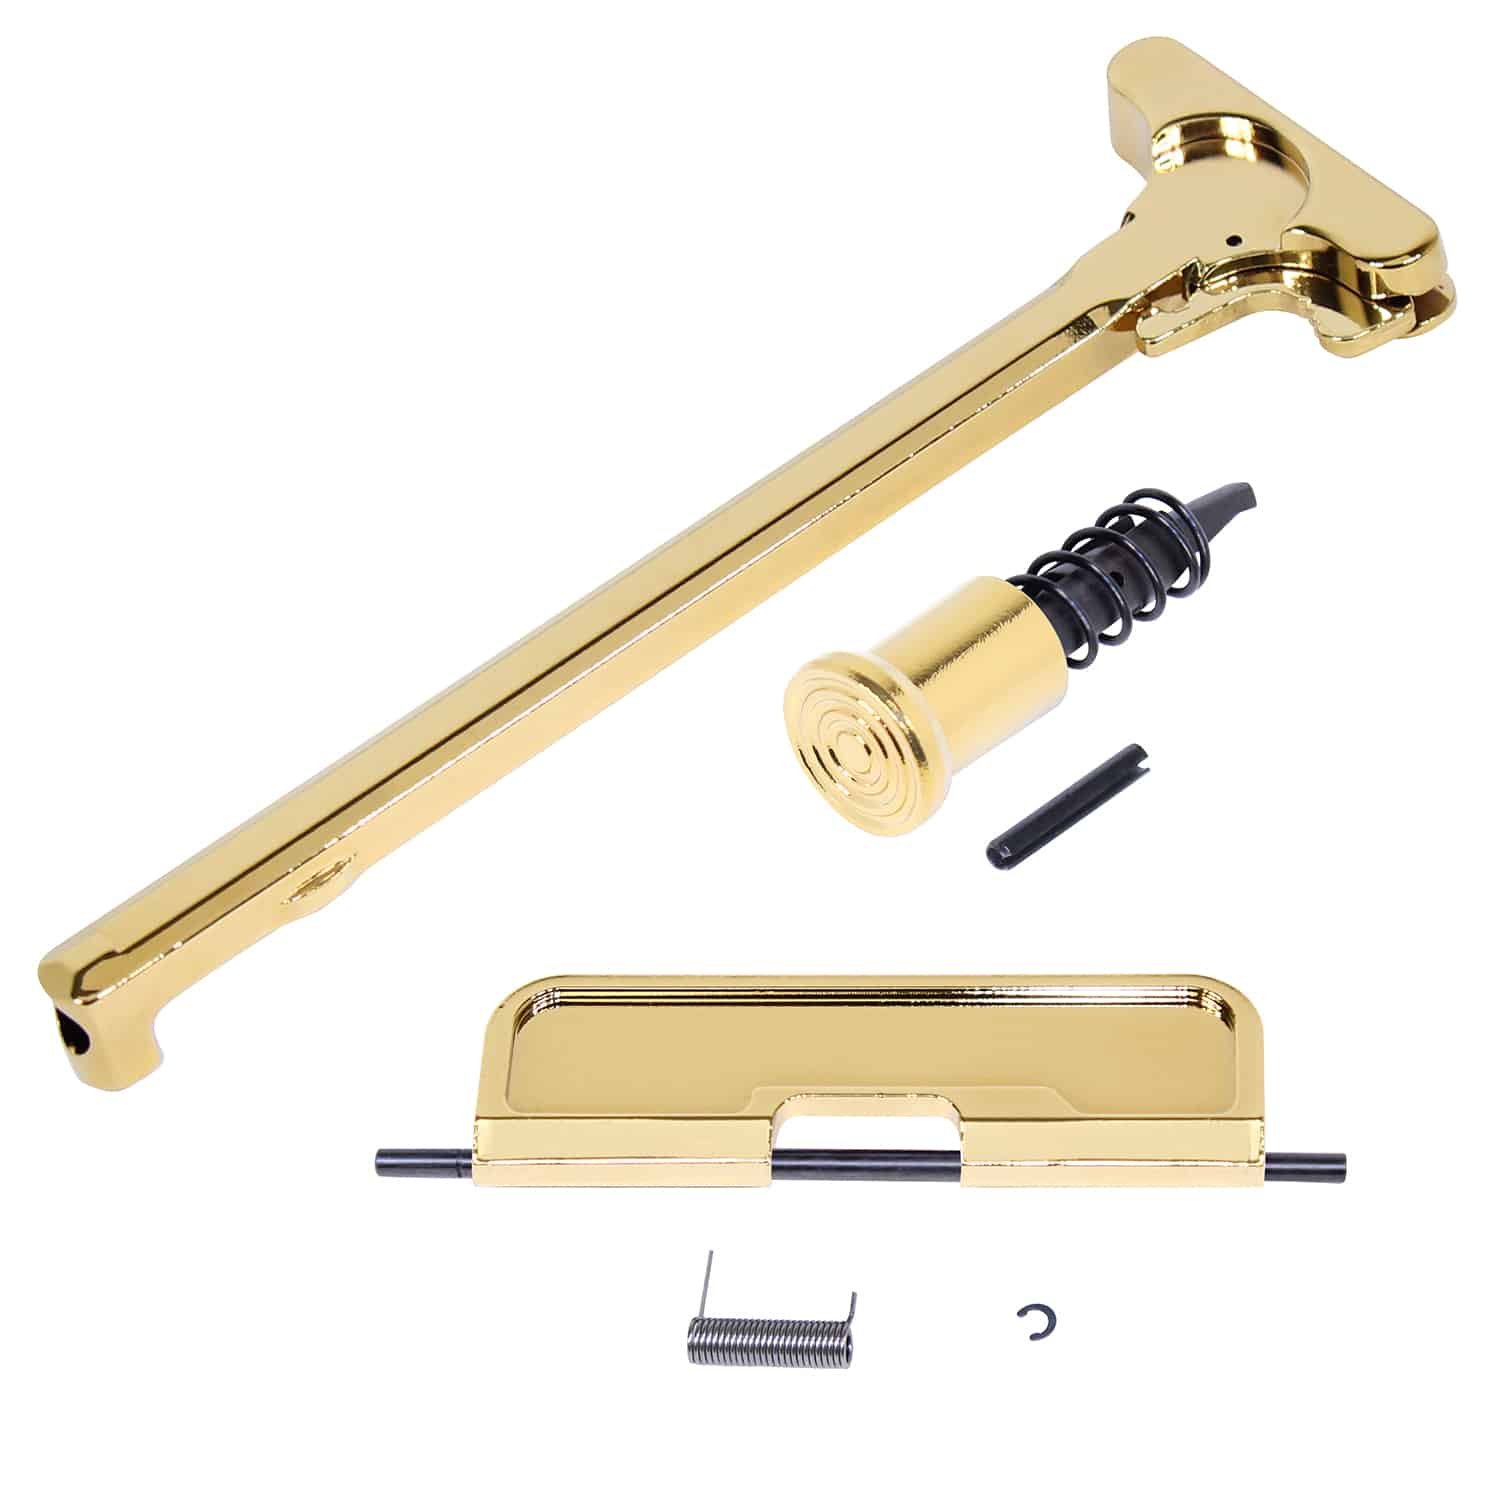 AR-15 Upper Receiver Assembly Kit (Gold Plated)